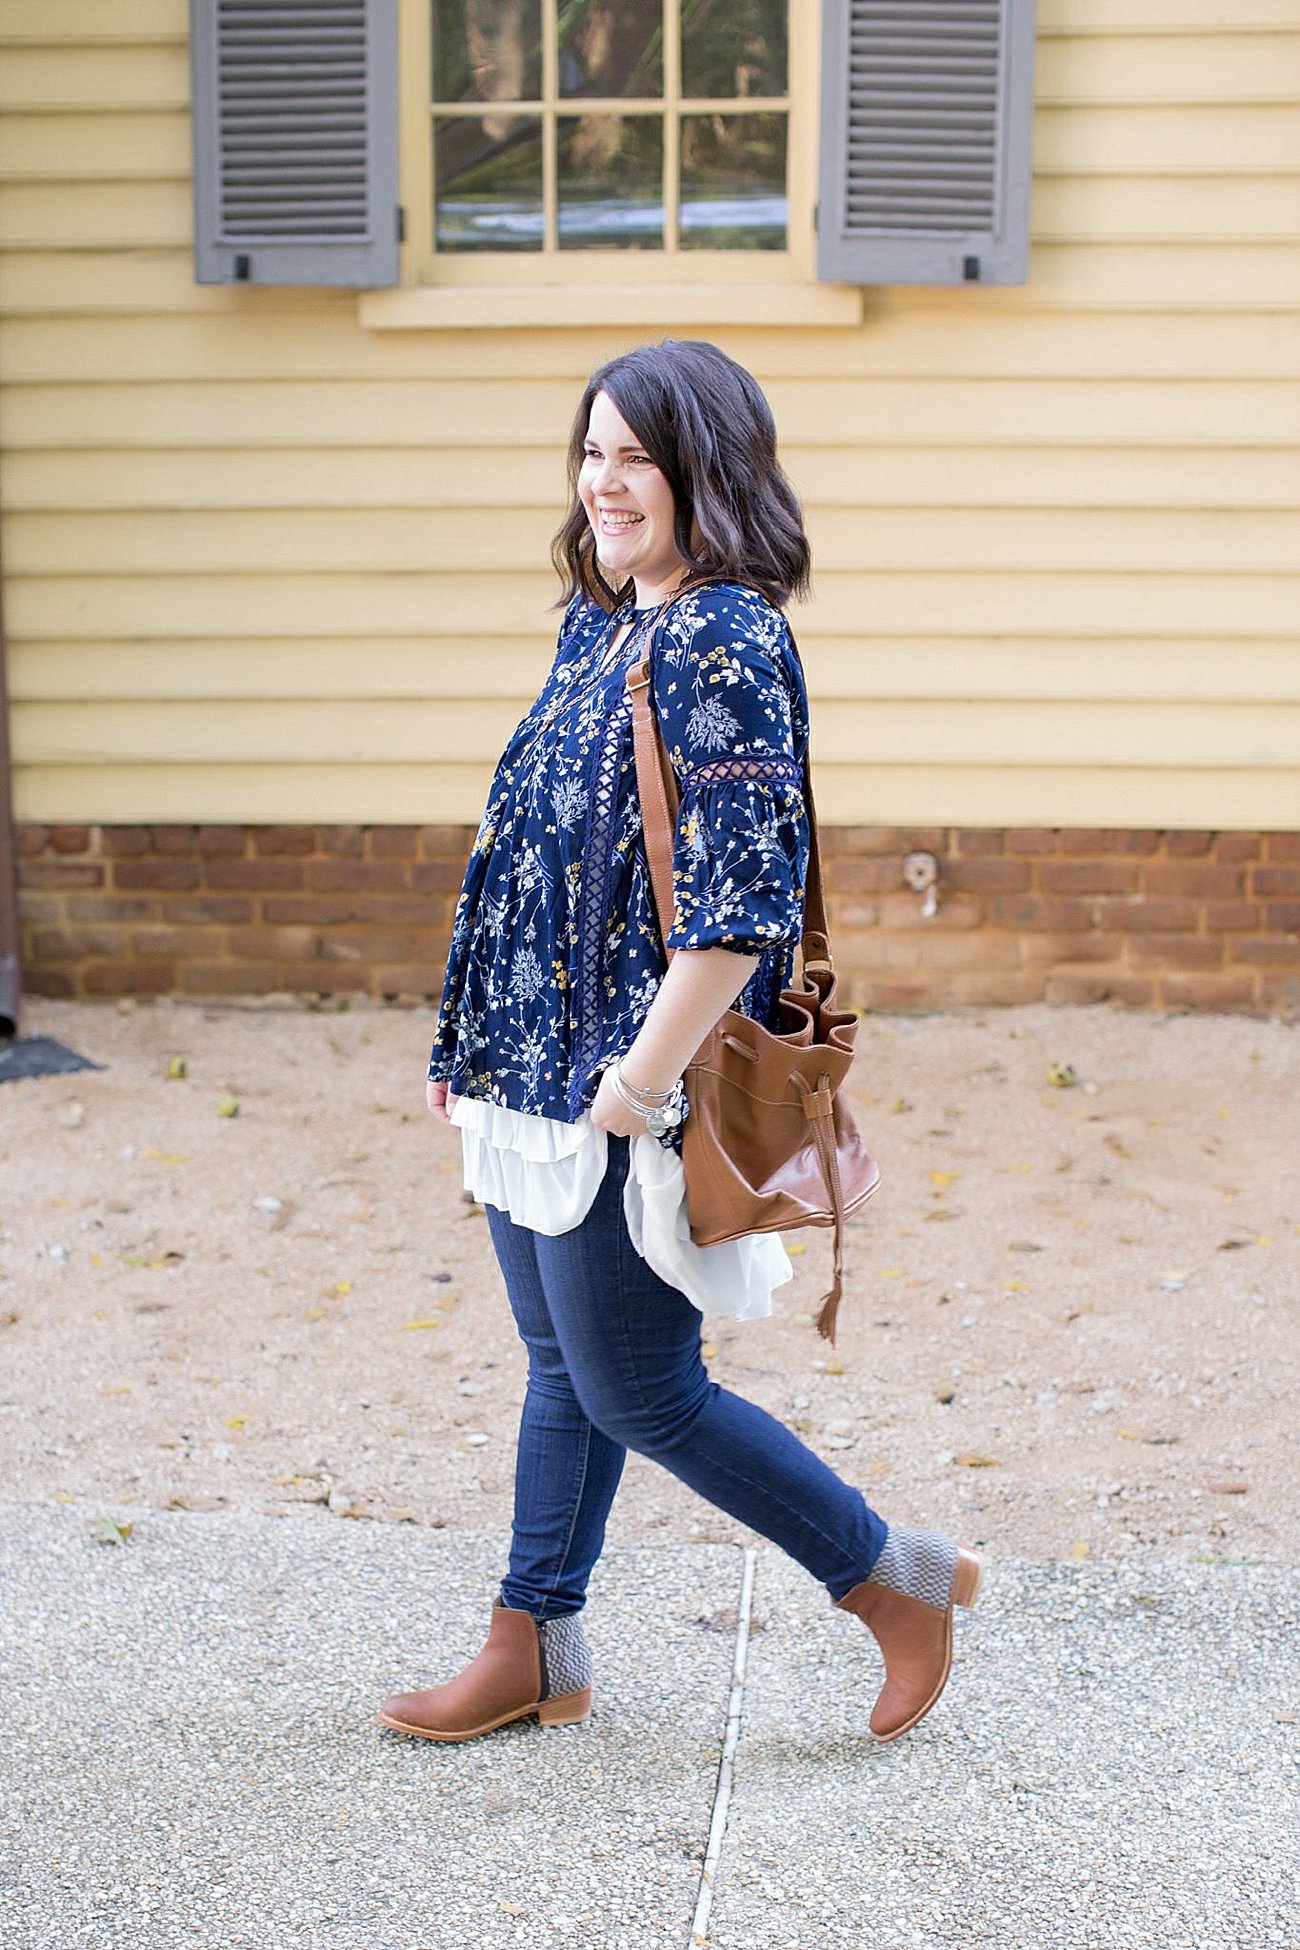 Grace & Lace peasant top and chiffon lace extender from The Flourish Market, Paige denim, Root Collective espe booties | Ethical Fashion, North Carolina Life and Style Blogger (11)